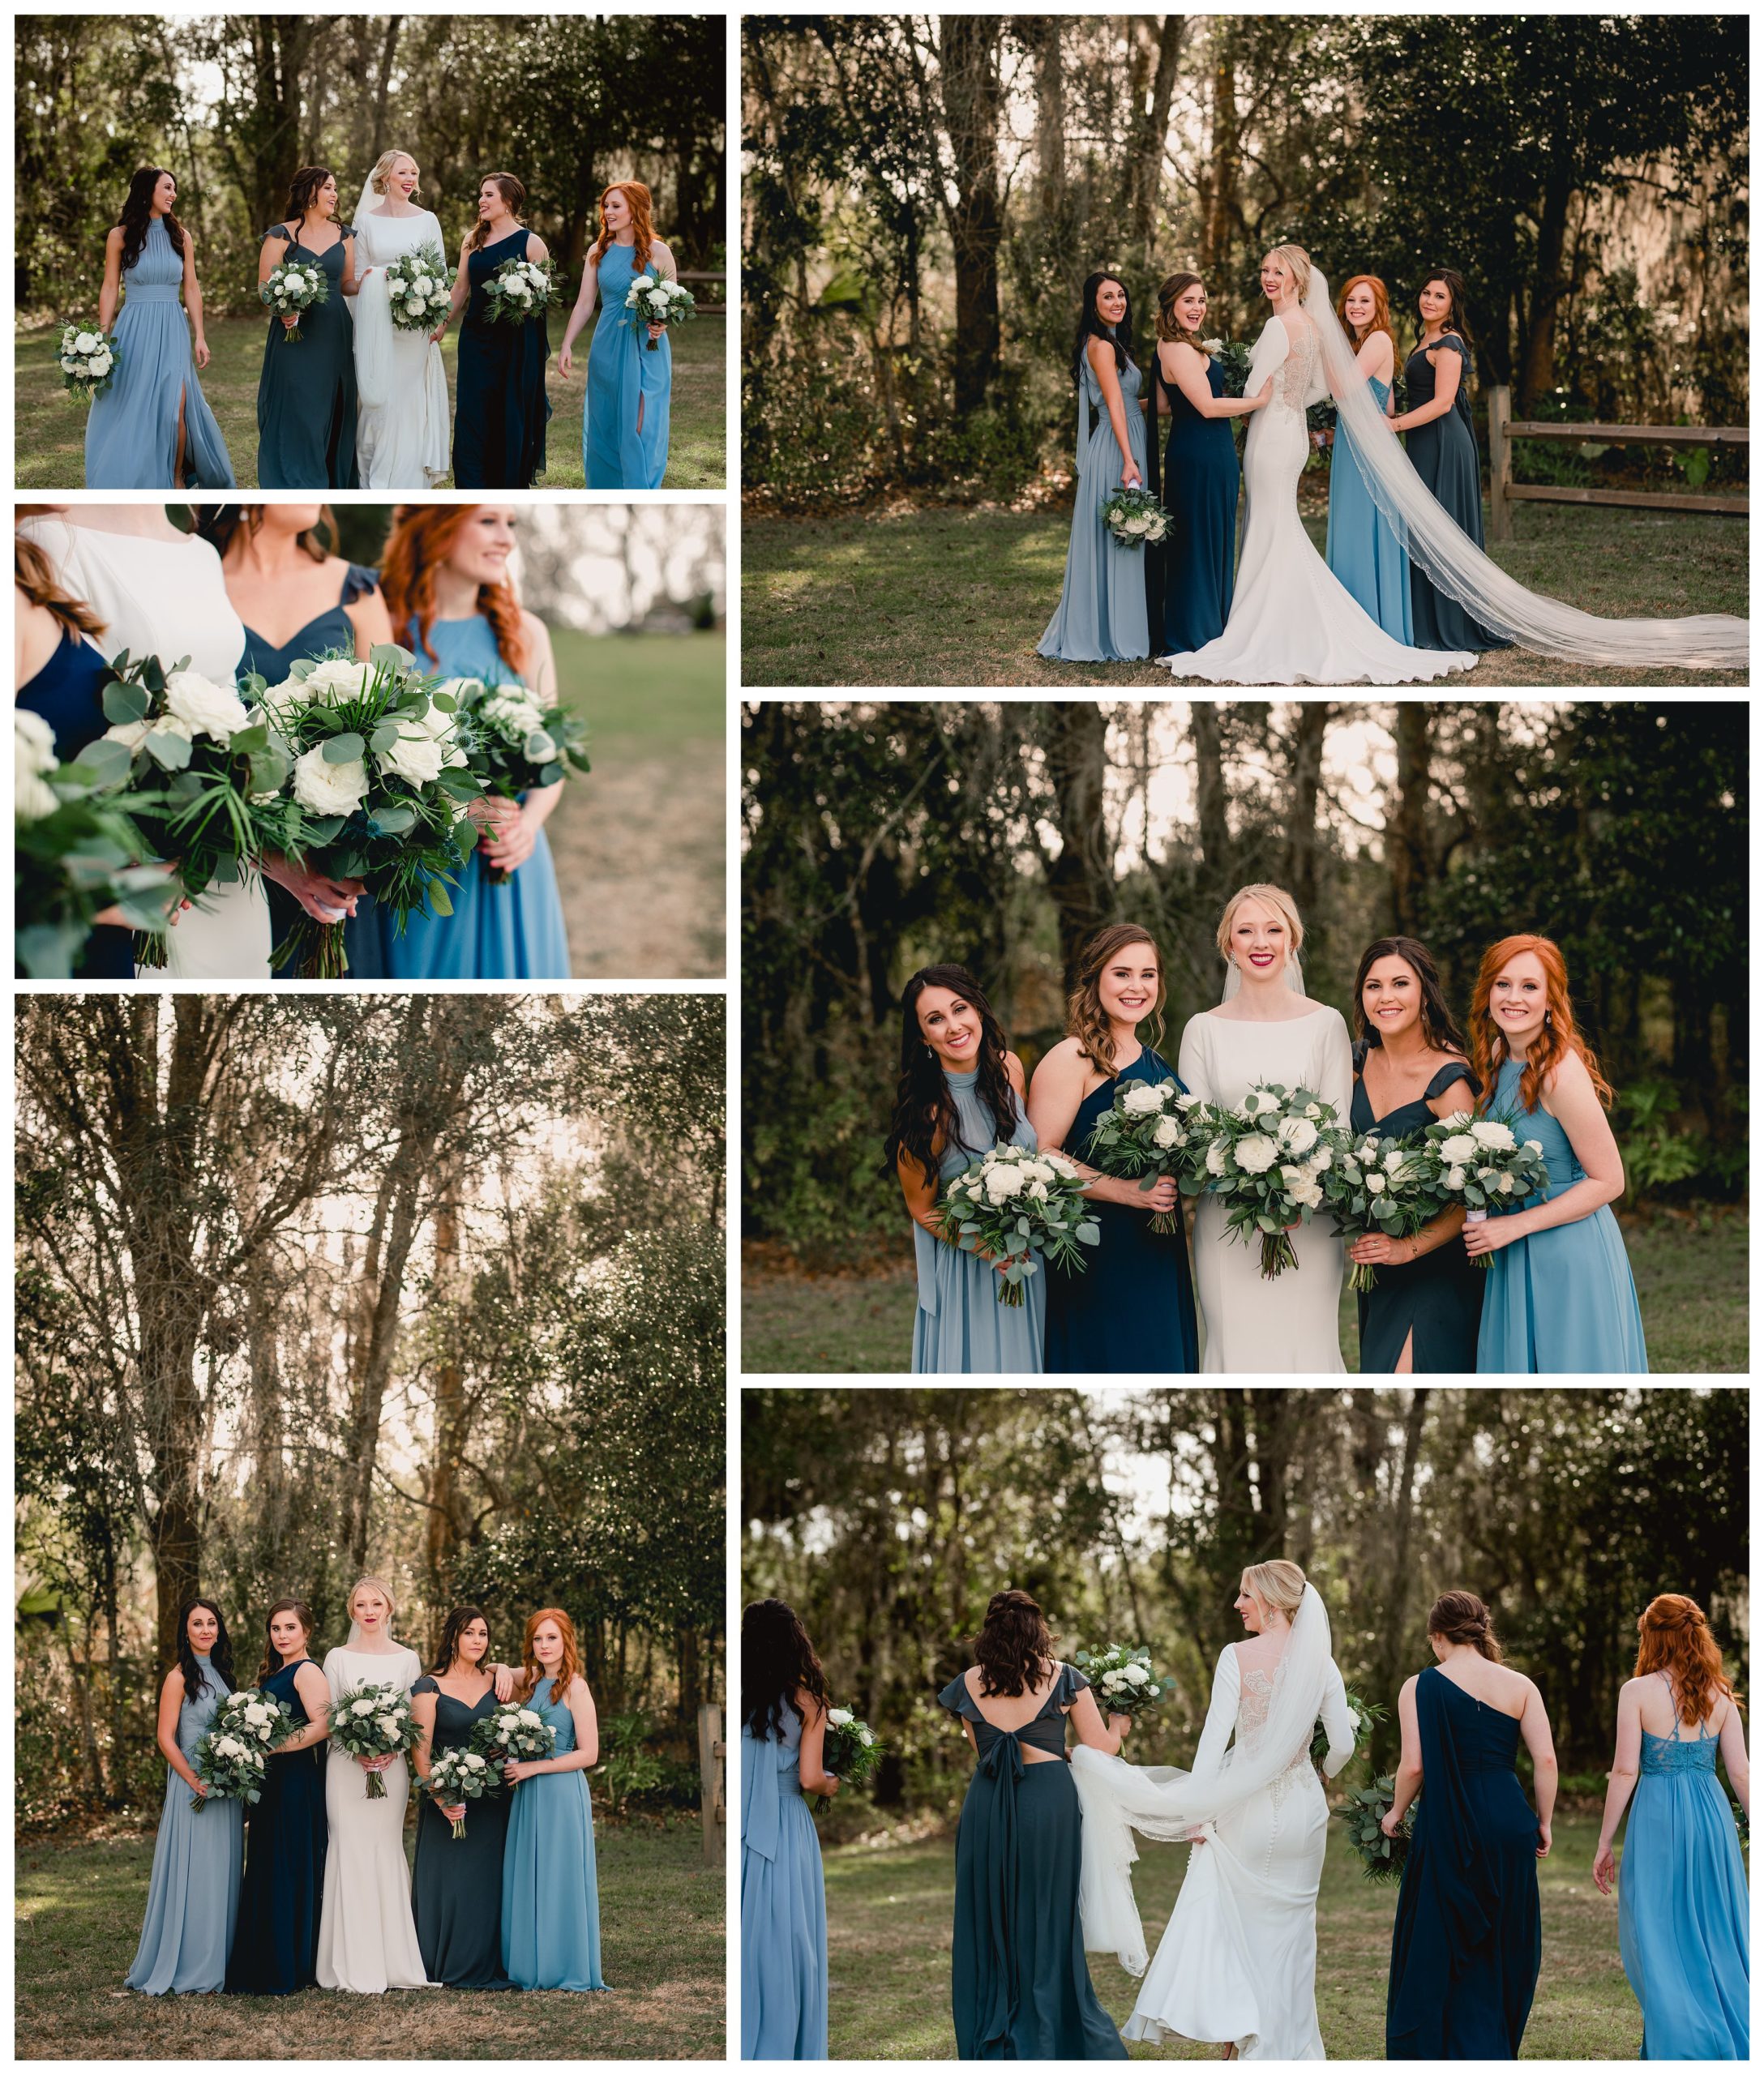 Bridal party pictures by Clark Plantation wedding photographer - Shelly Williams Photography